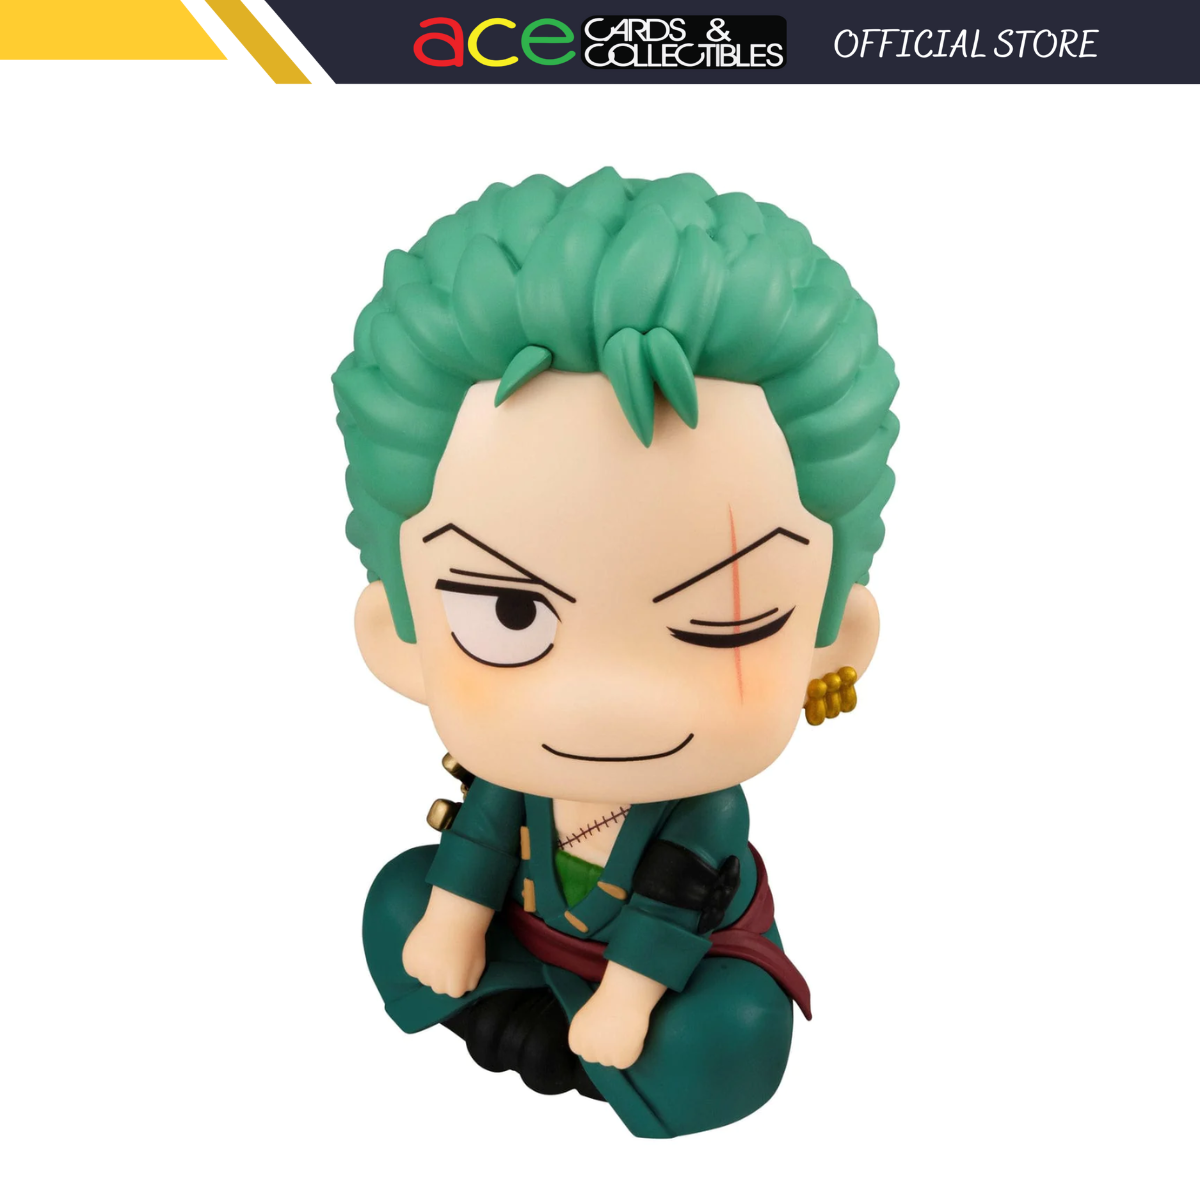 Funko repeats with a new Jujutsu Kaisen wave